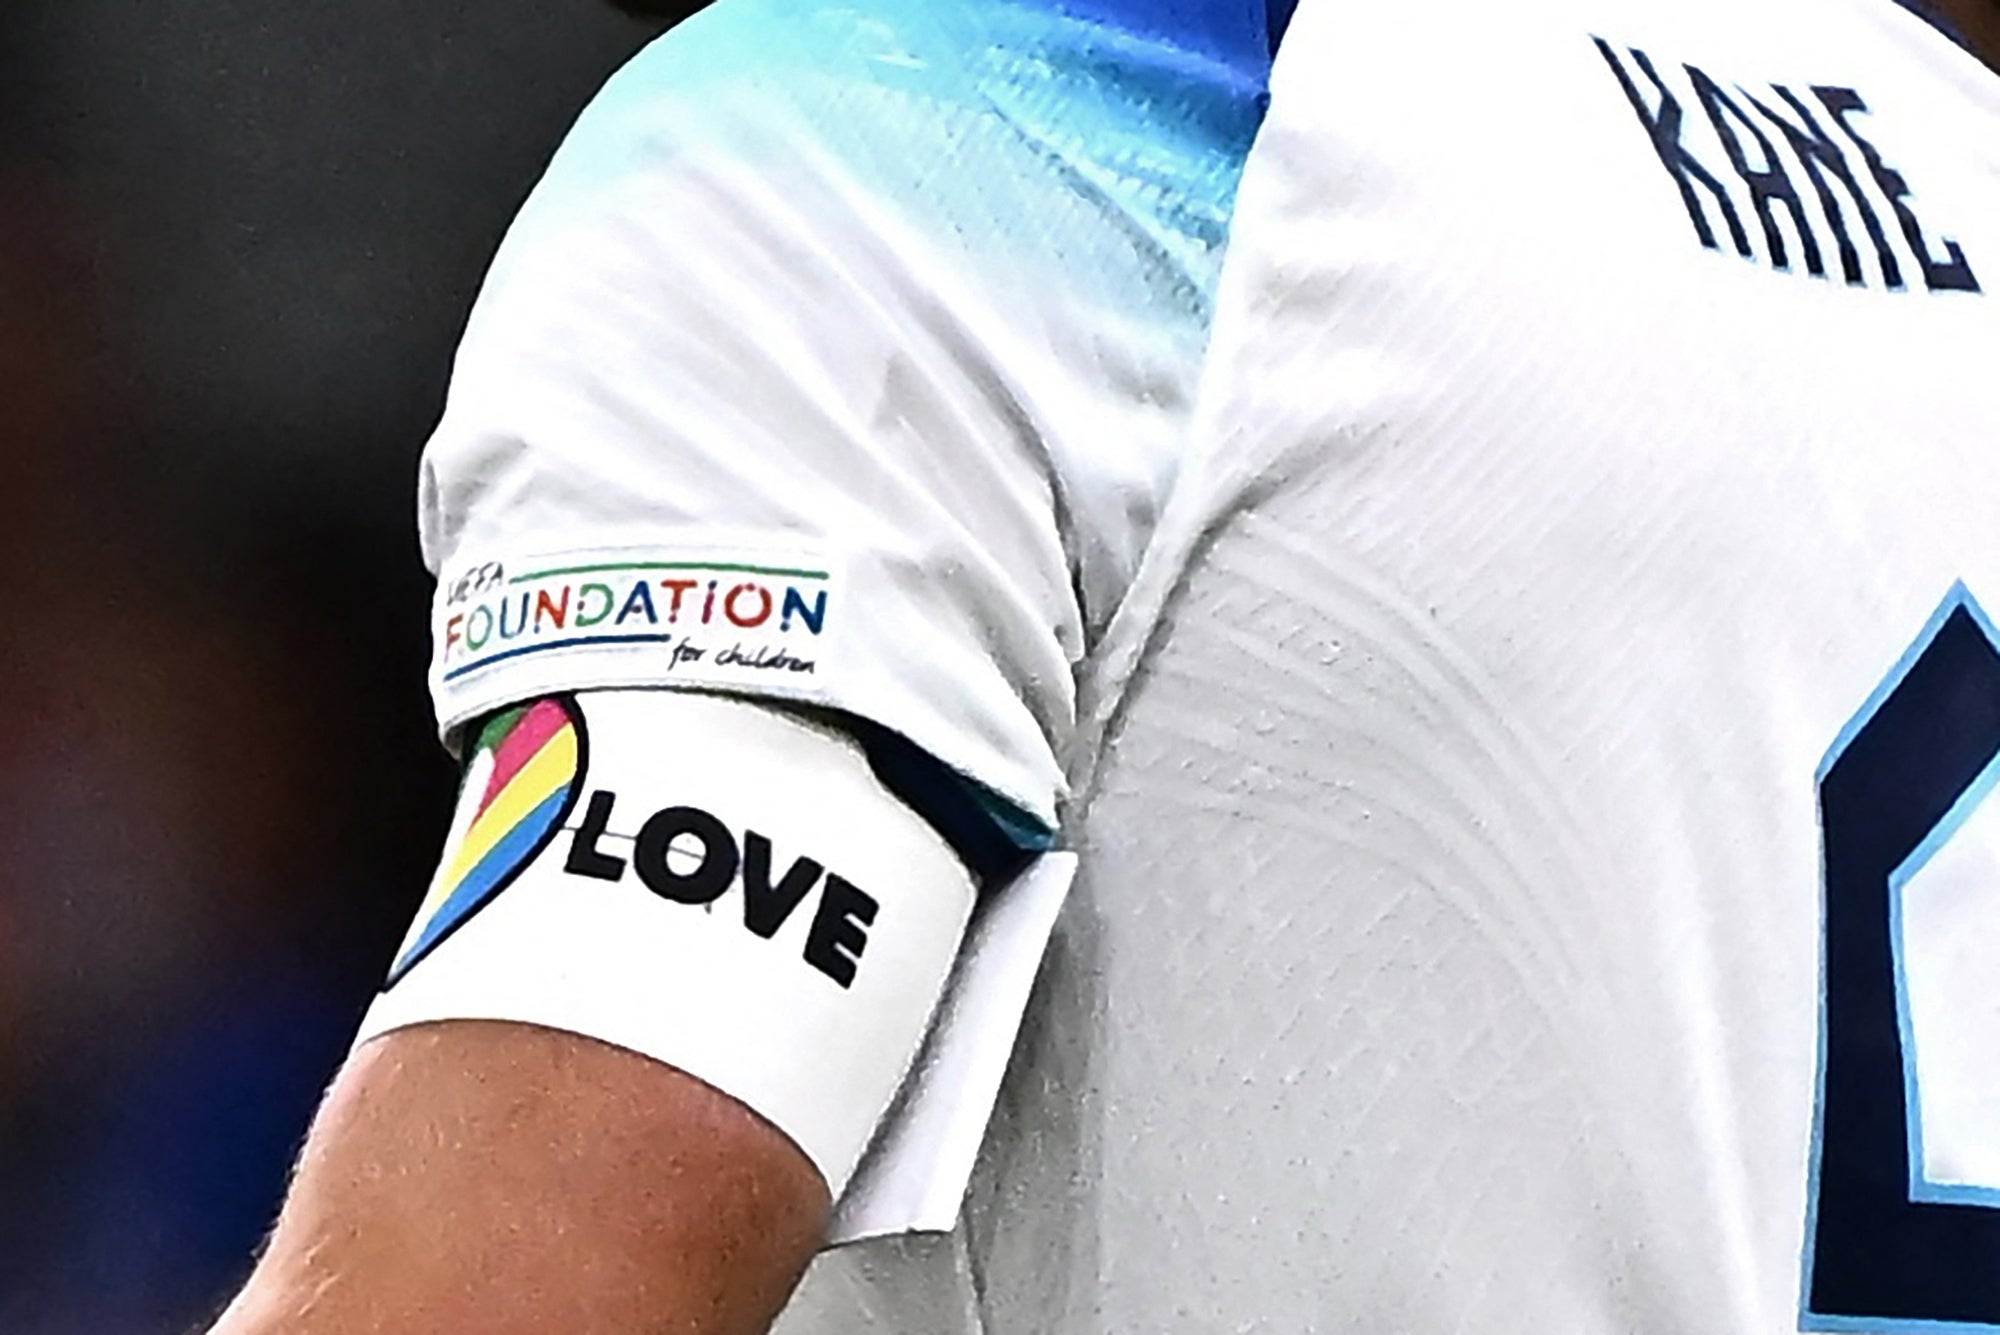 England reversed their decision to wear the OneLove armband